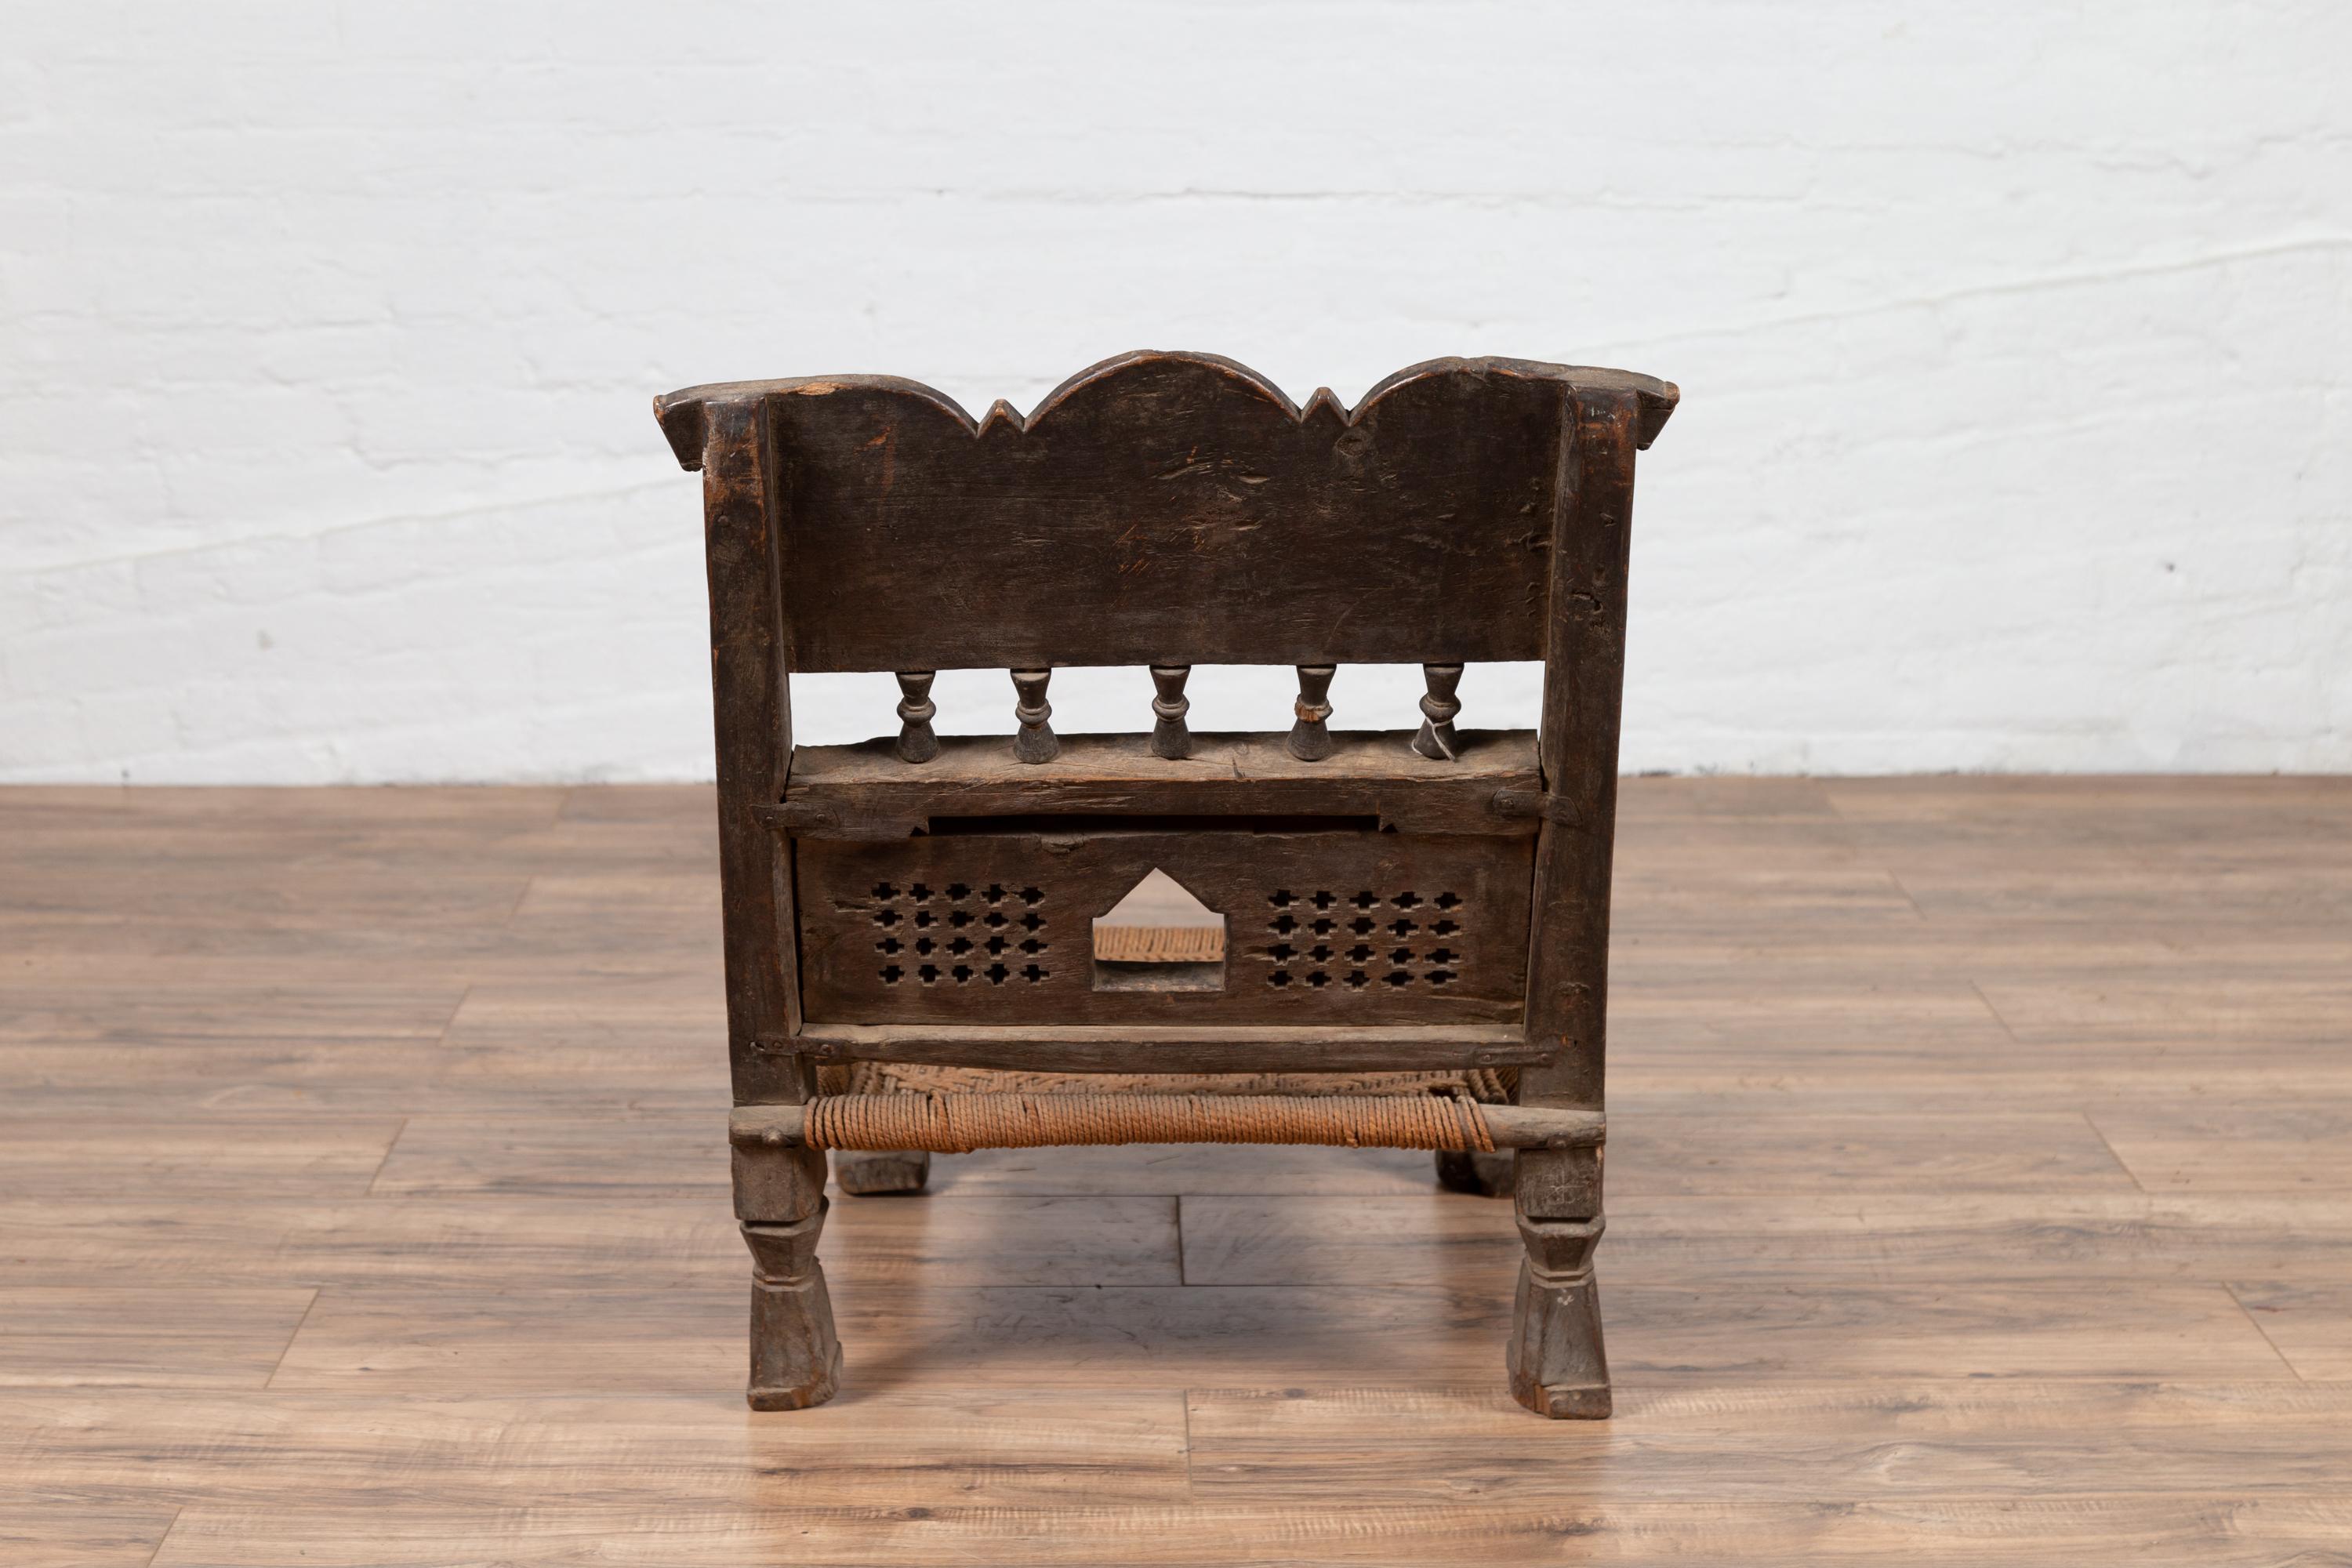 Indian Antique Rustic Low Seat Wooden Chair with Carved Rosettes and Rope Seat For Sale 6